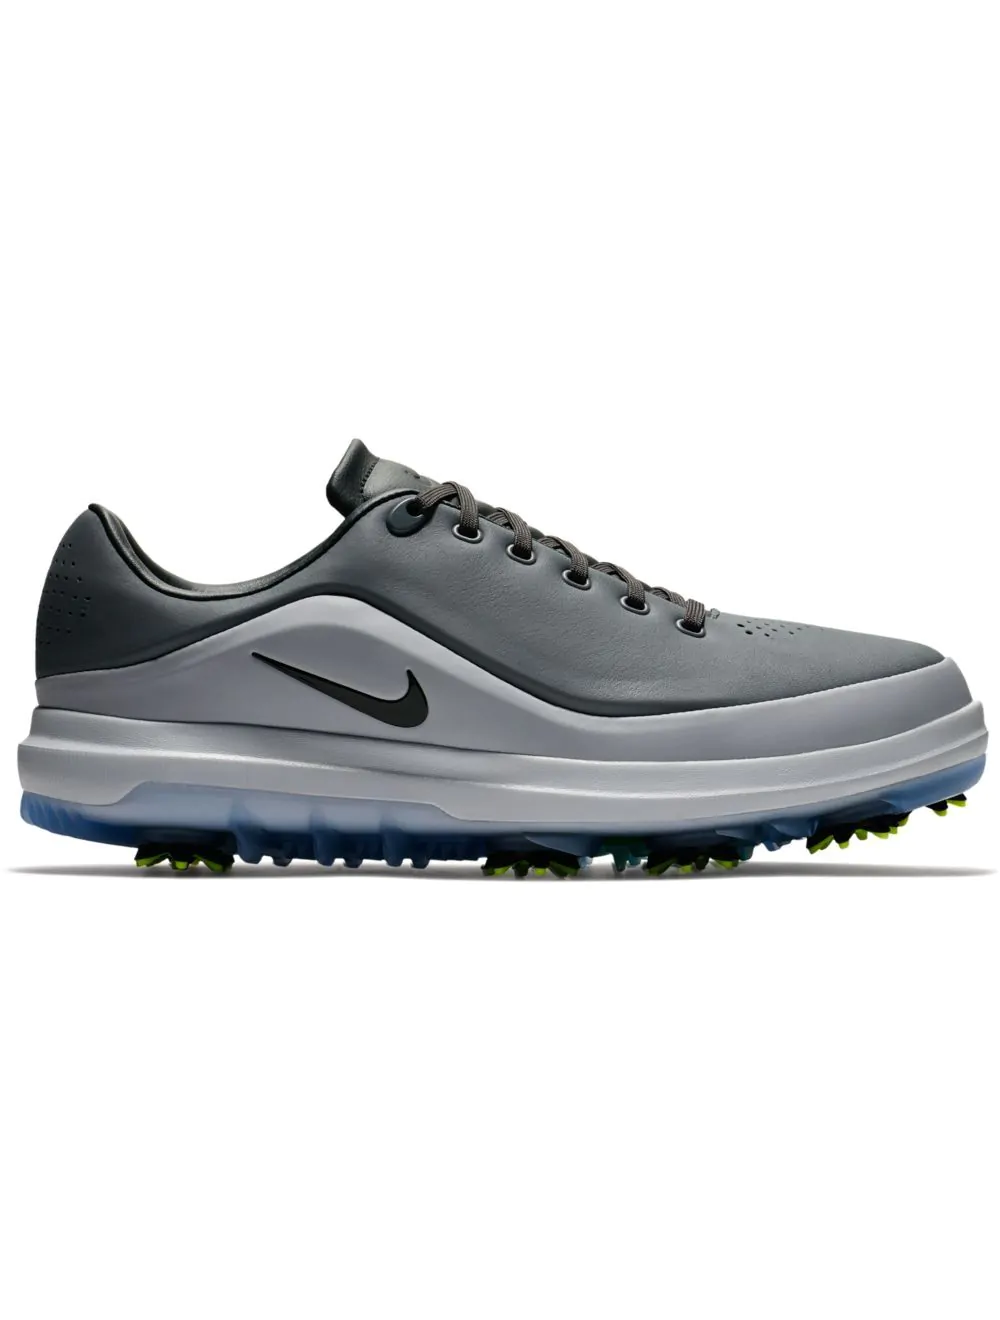 Air Zoom Precision - Cool Grey/Black-Wolf Grey-Anthracite